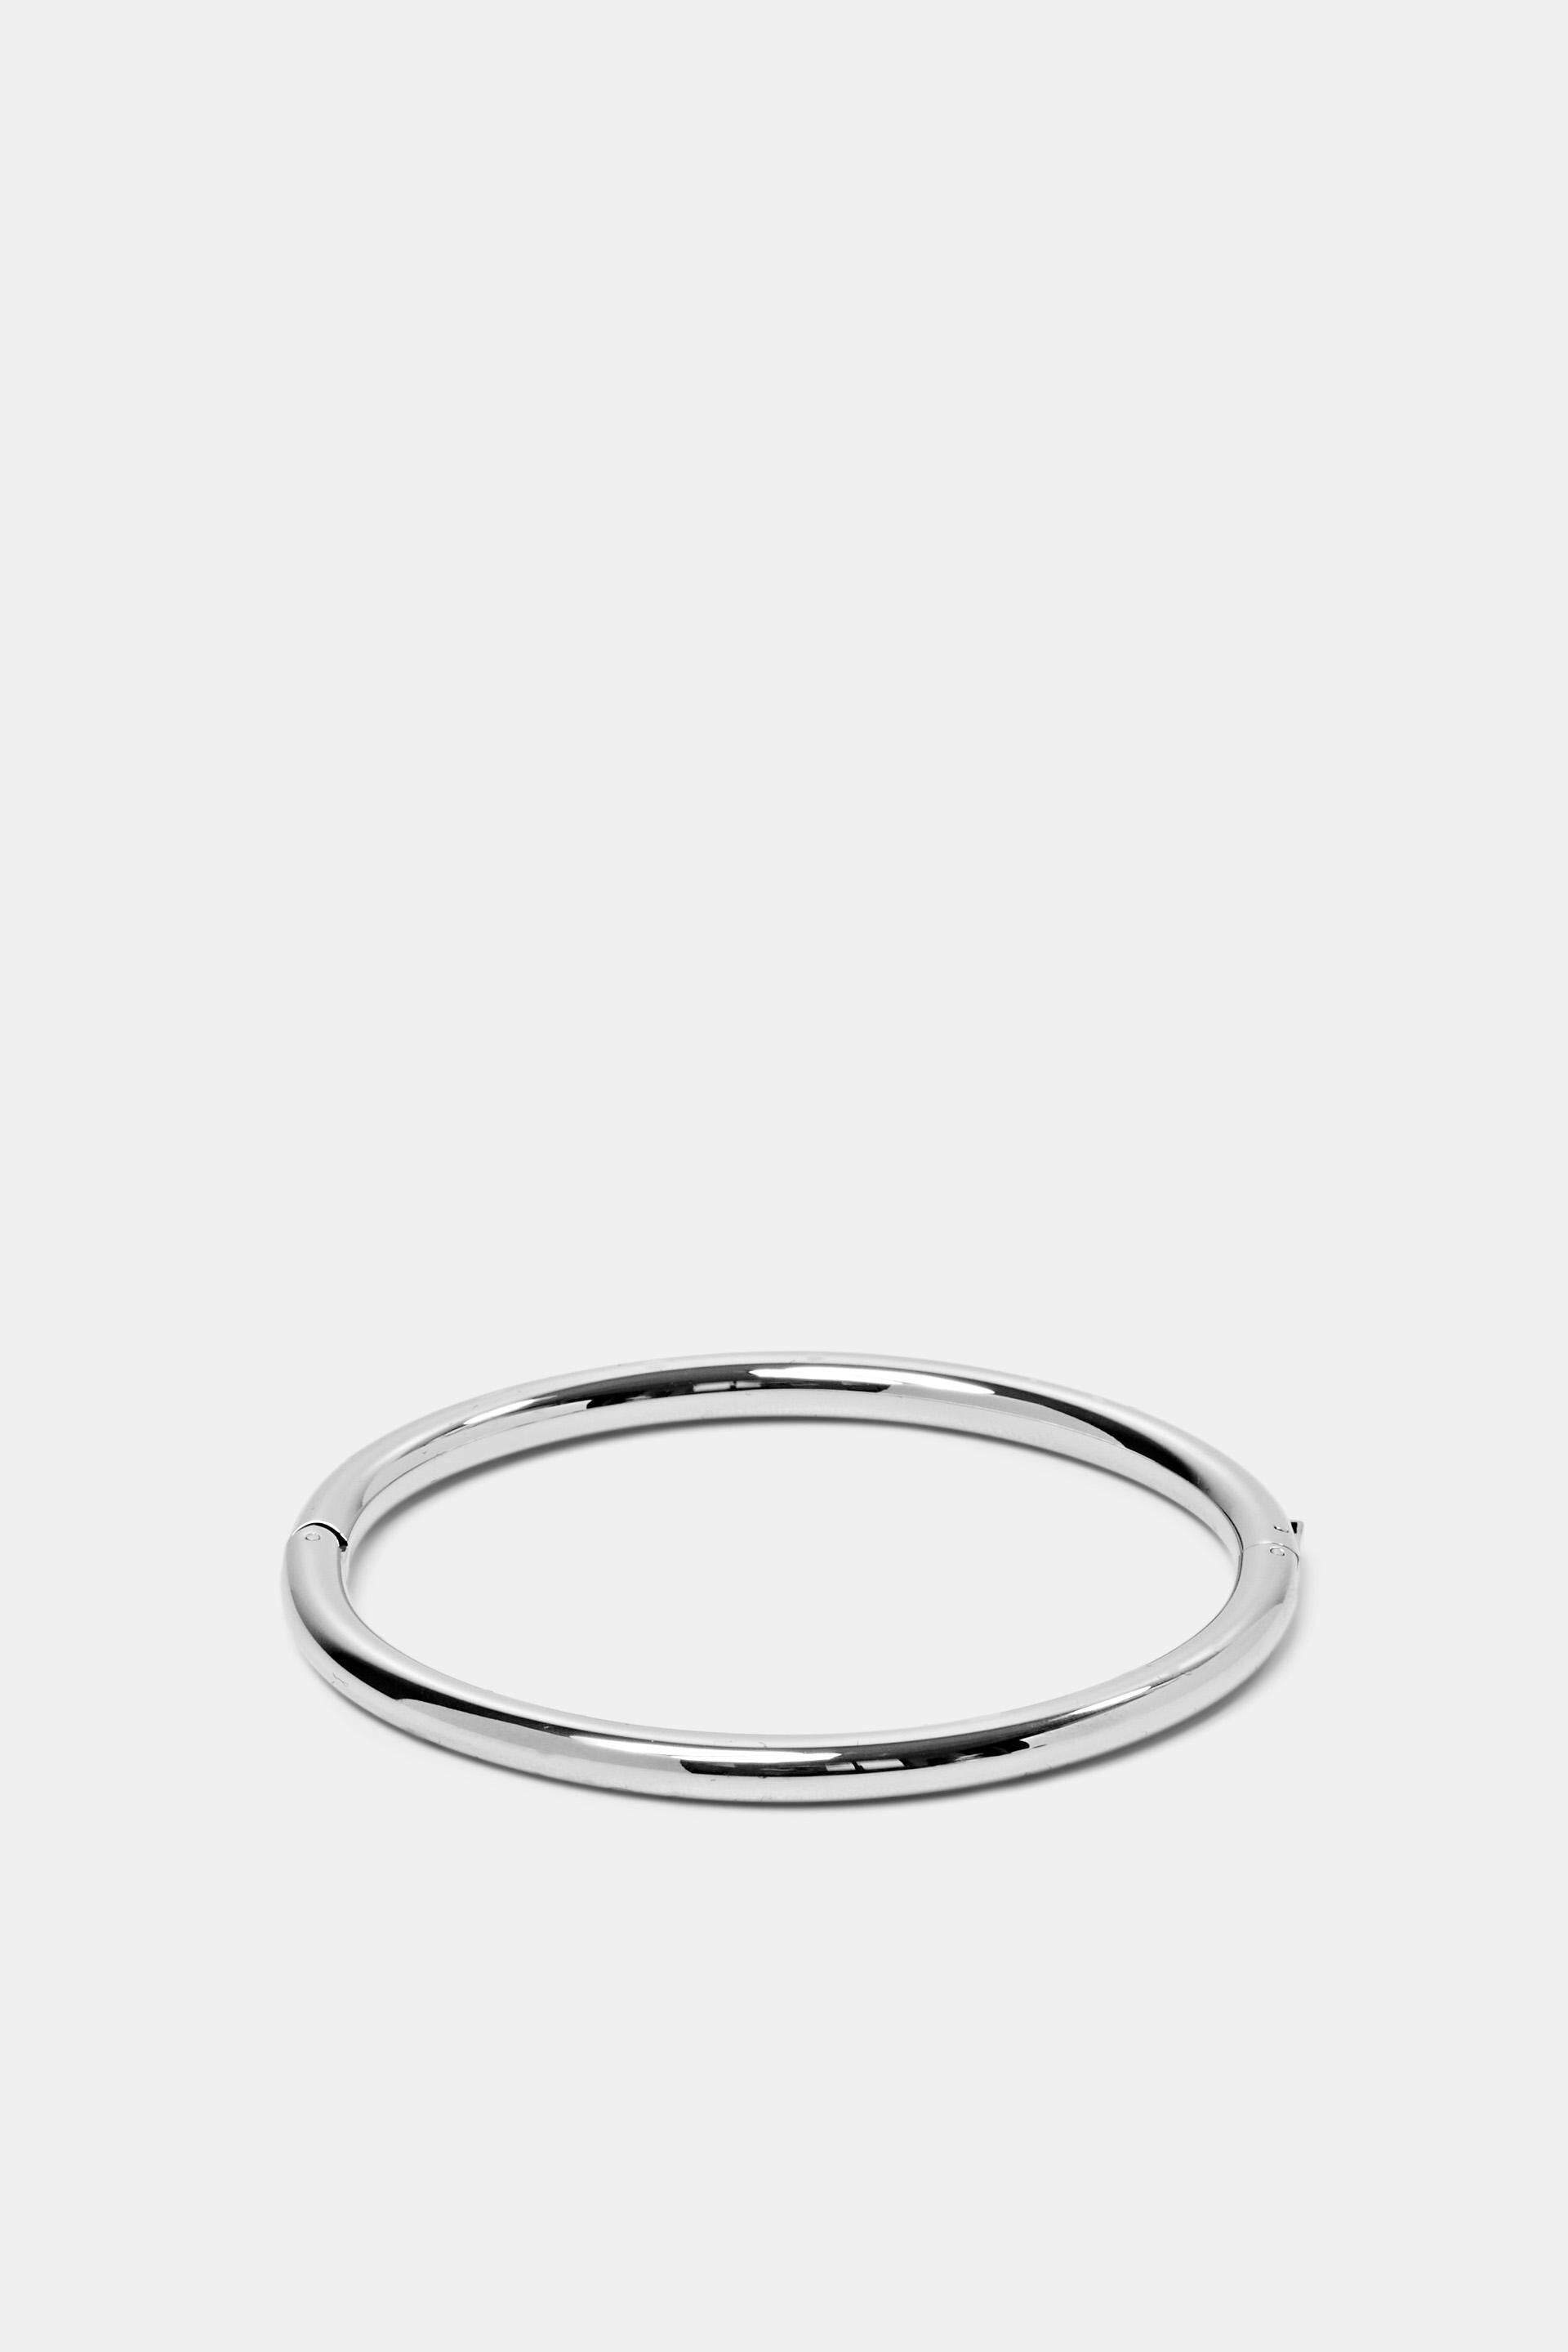 Esprit Online Store Bangle made of steel stainless